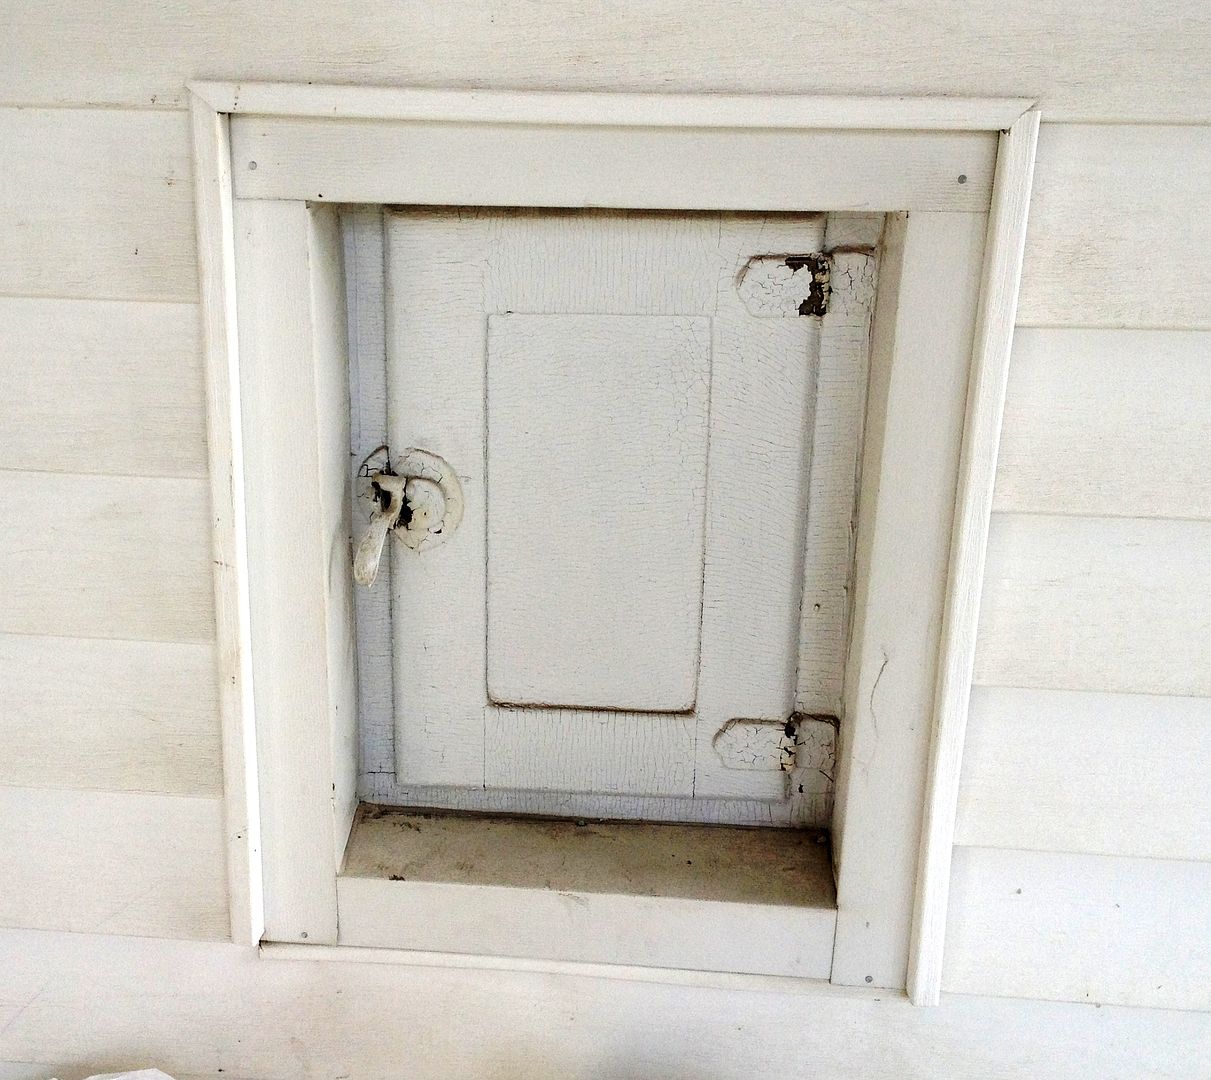 And the Honor still has its old ice box door on the back porch.